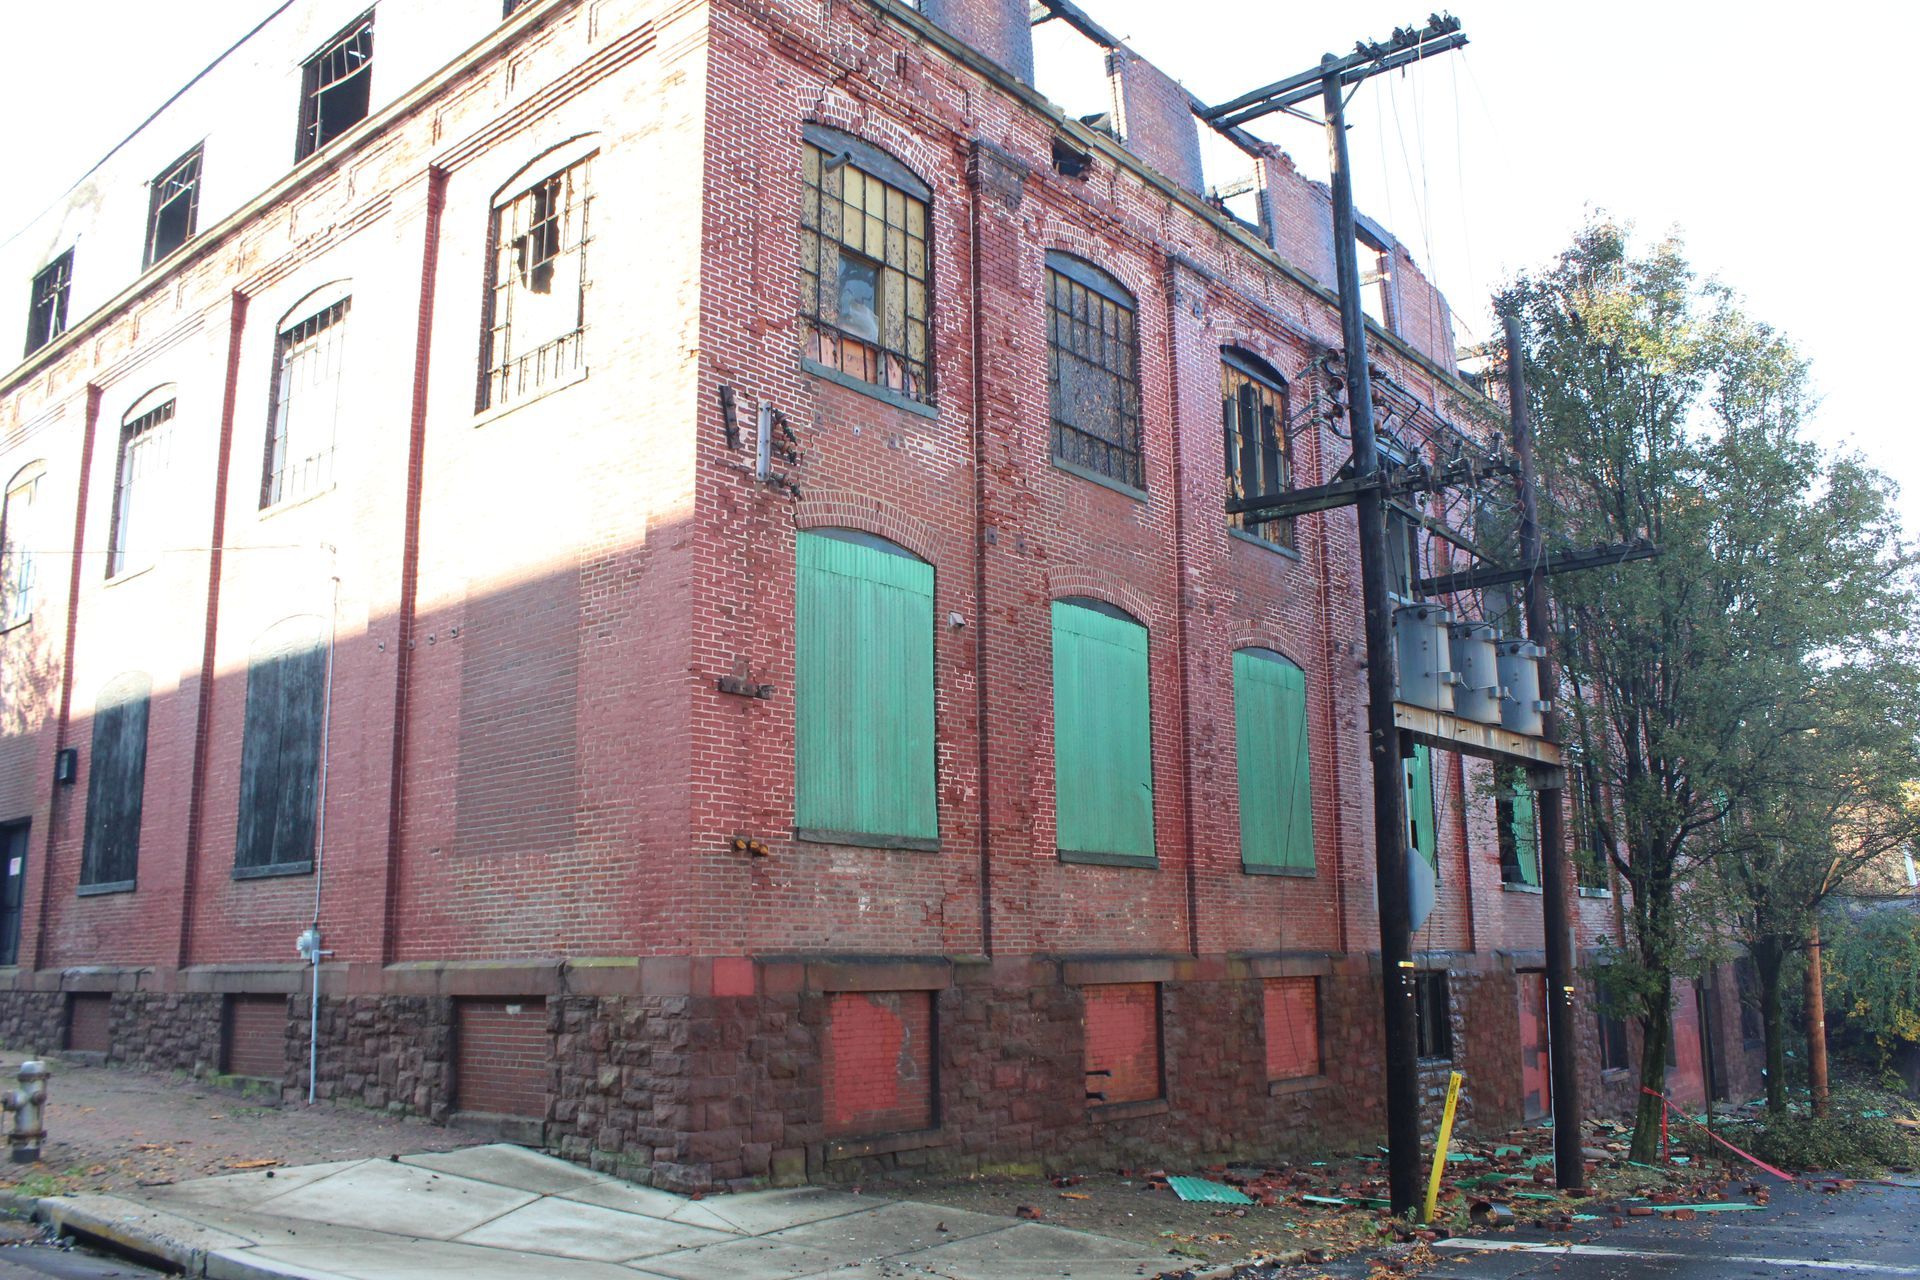 A brick building with green windows and a telephone pole in front of it